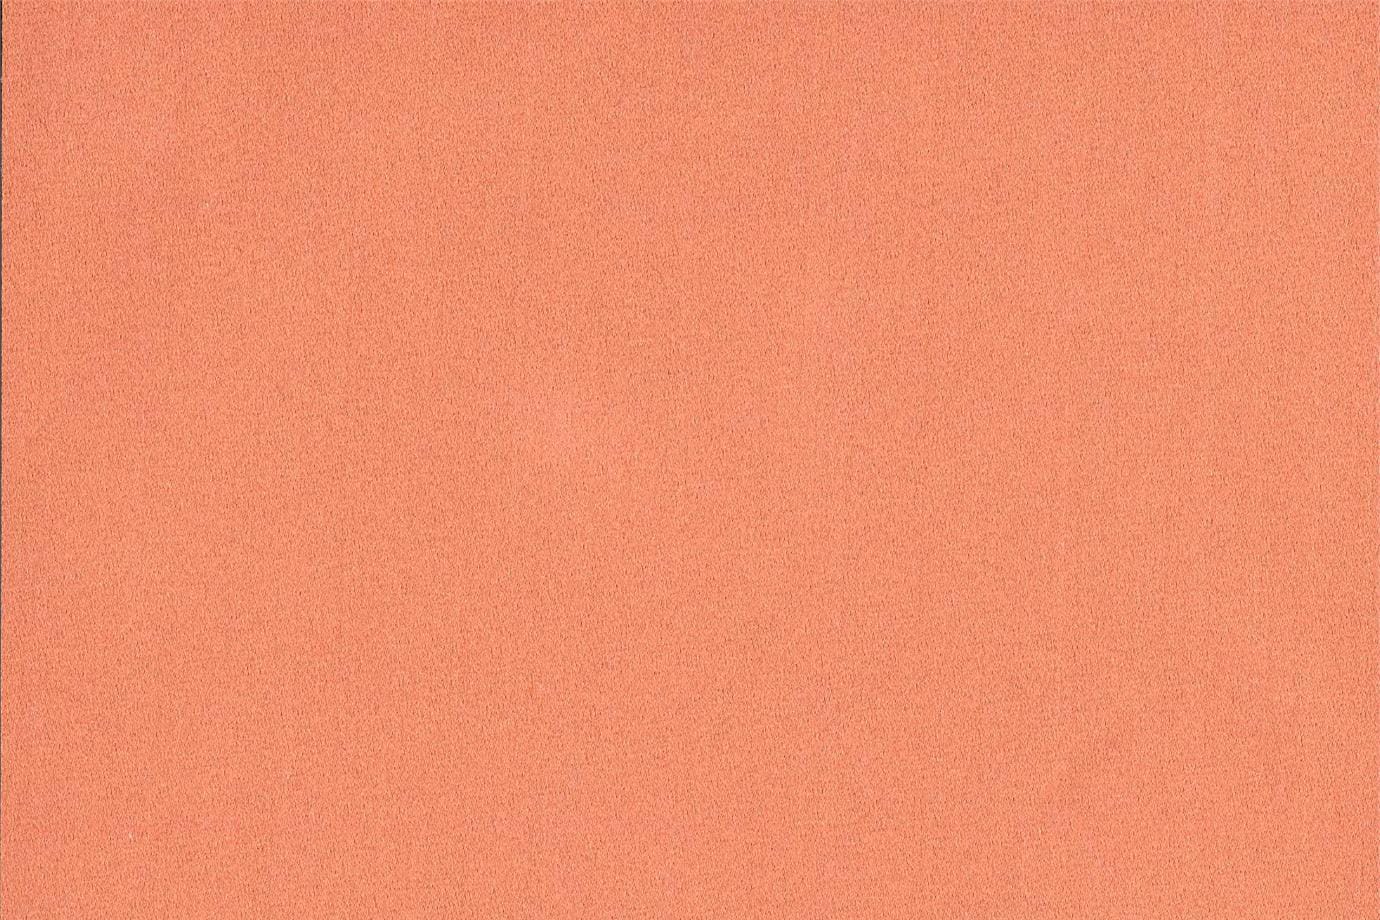 J1594 MEO PATACCA 014 Begonia home decoration fabric